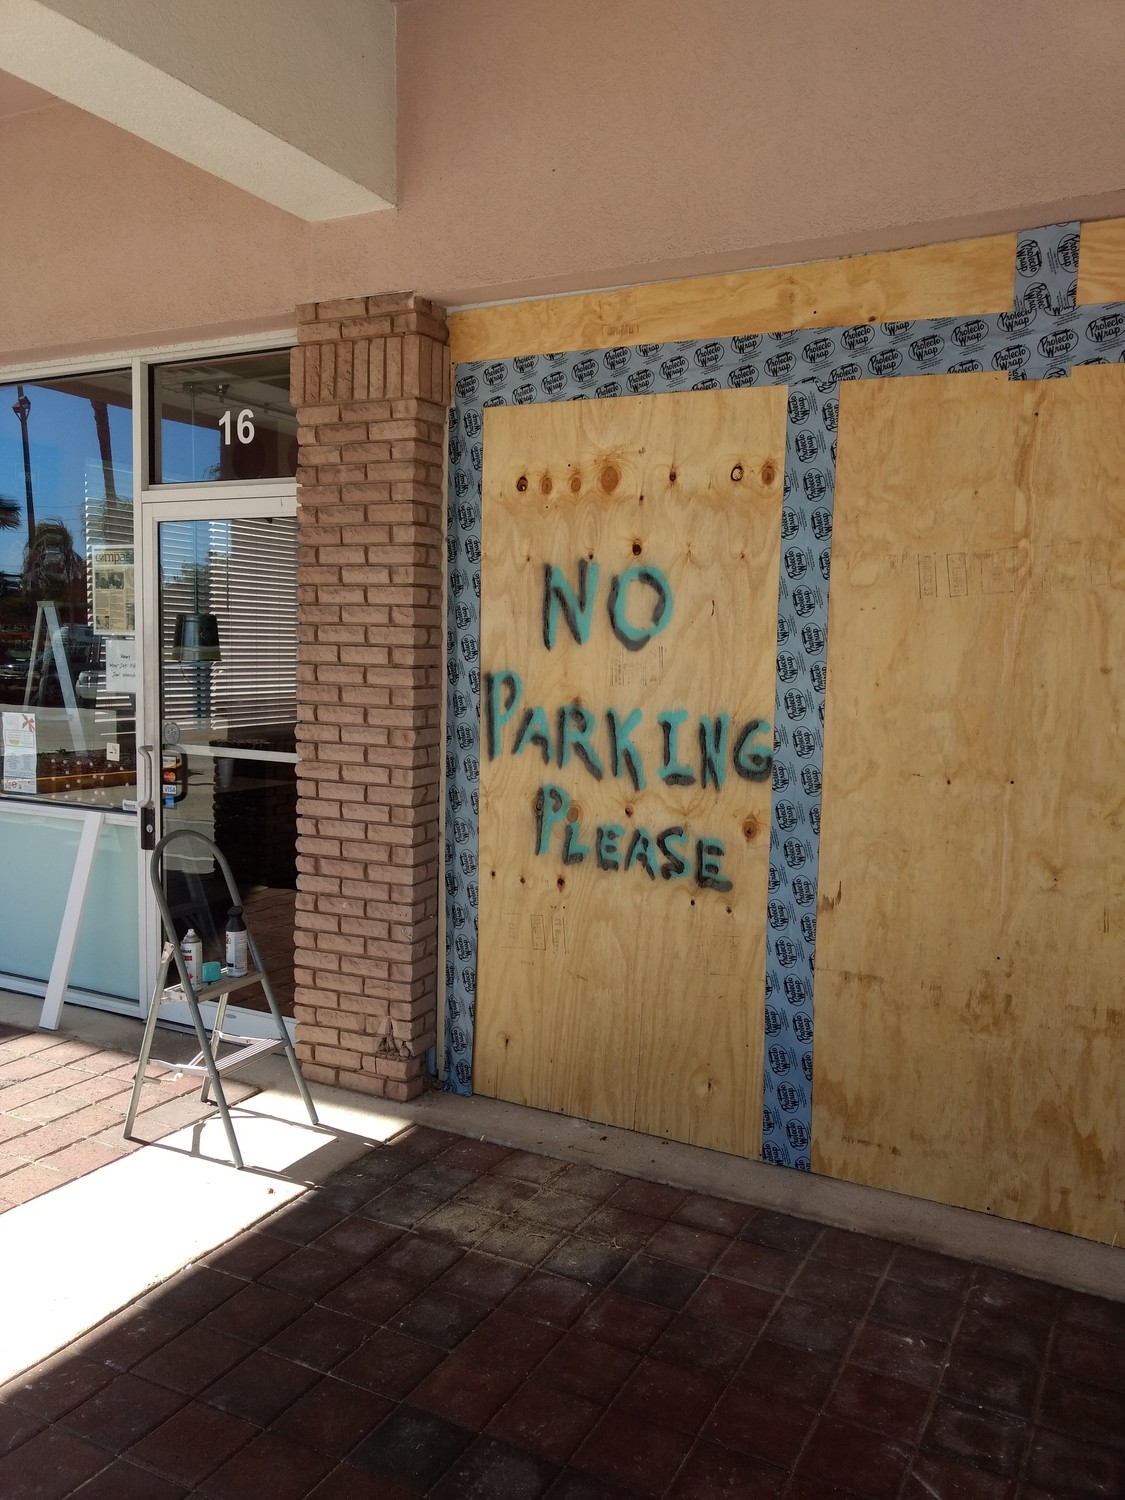 The boarded-up front window of Down South Barbecue requests that drivers refrain from parking in the store.